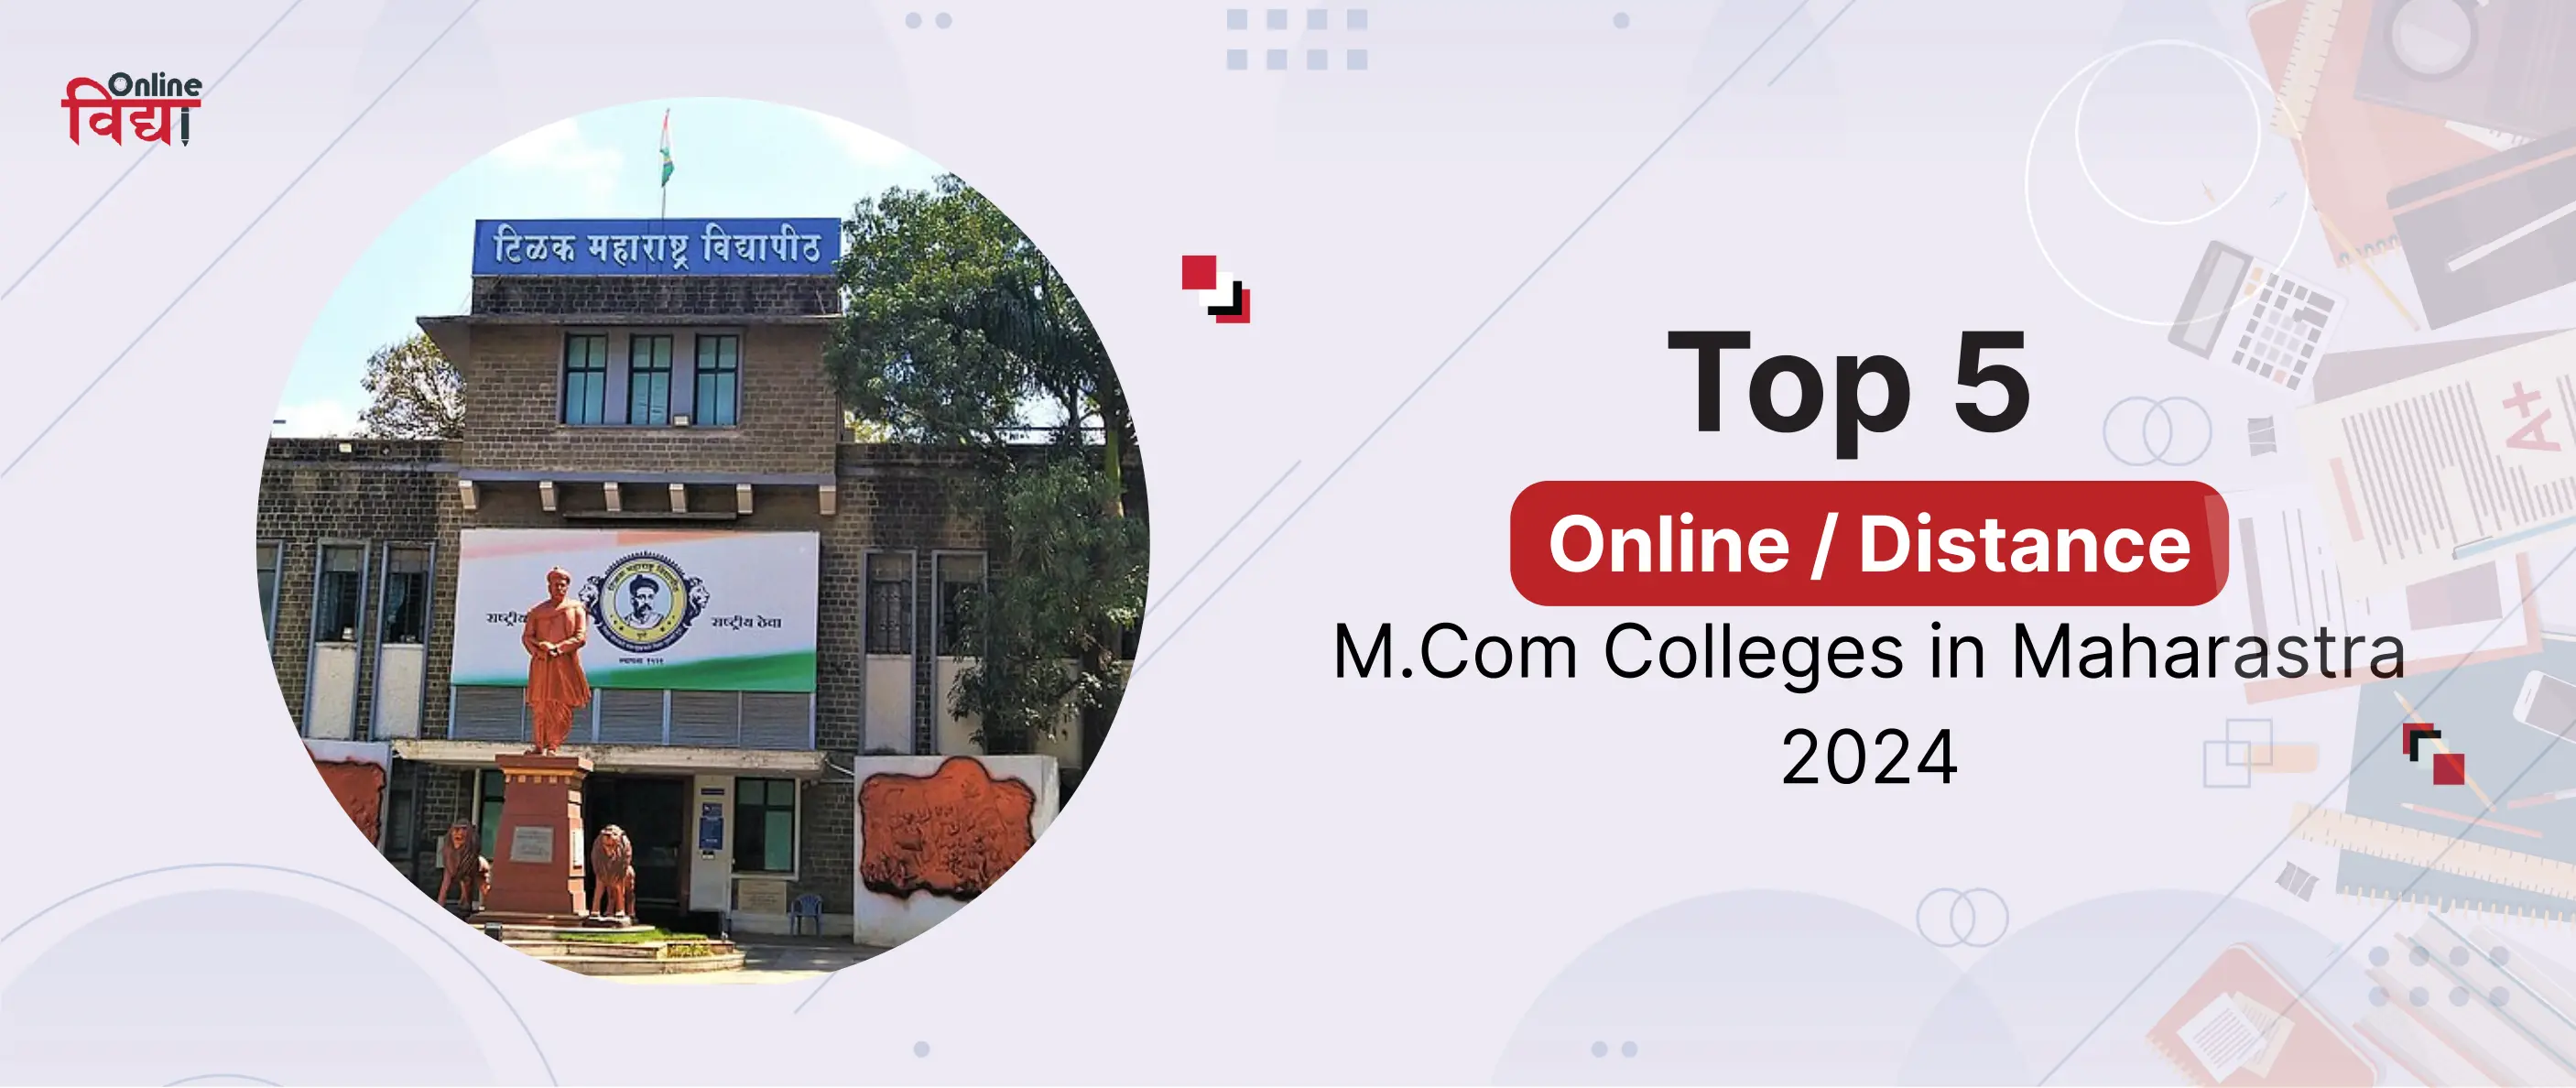 Top 5 Online/ Distance M.Com Colleges in Maharashtra 2024